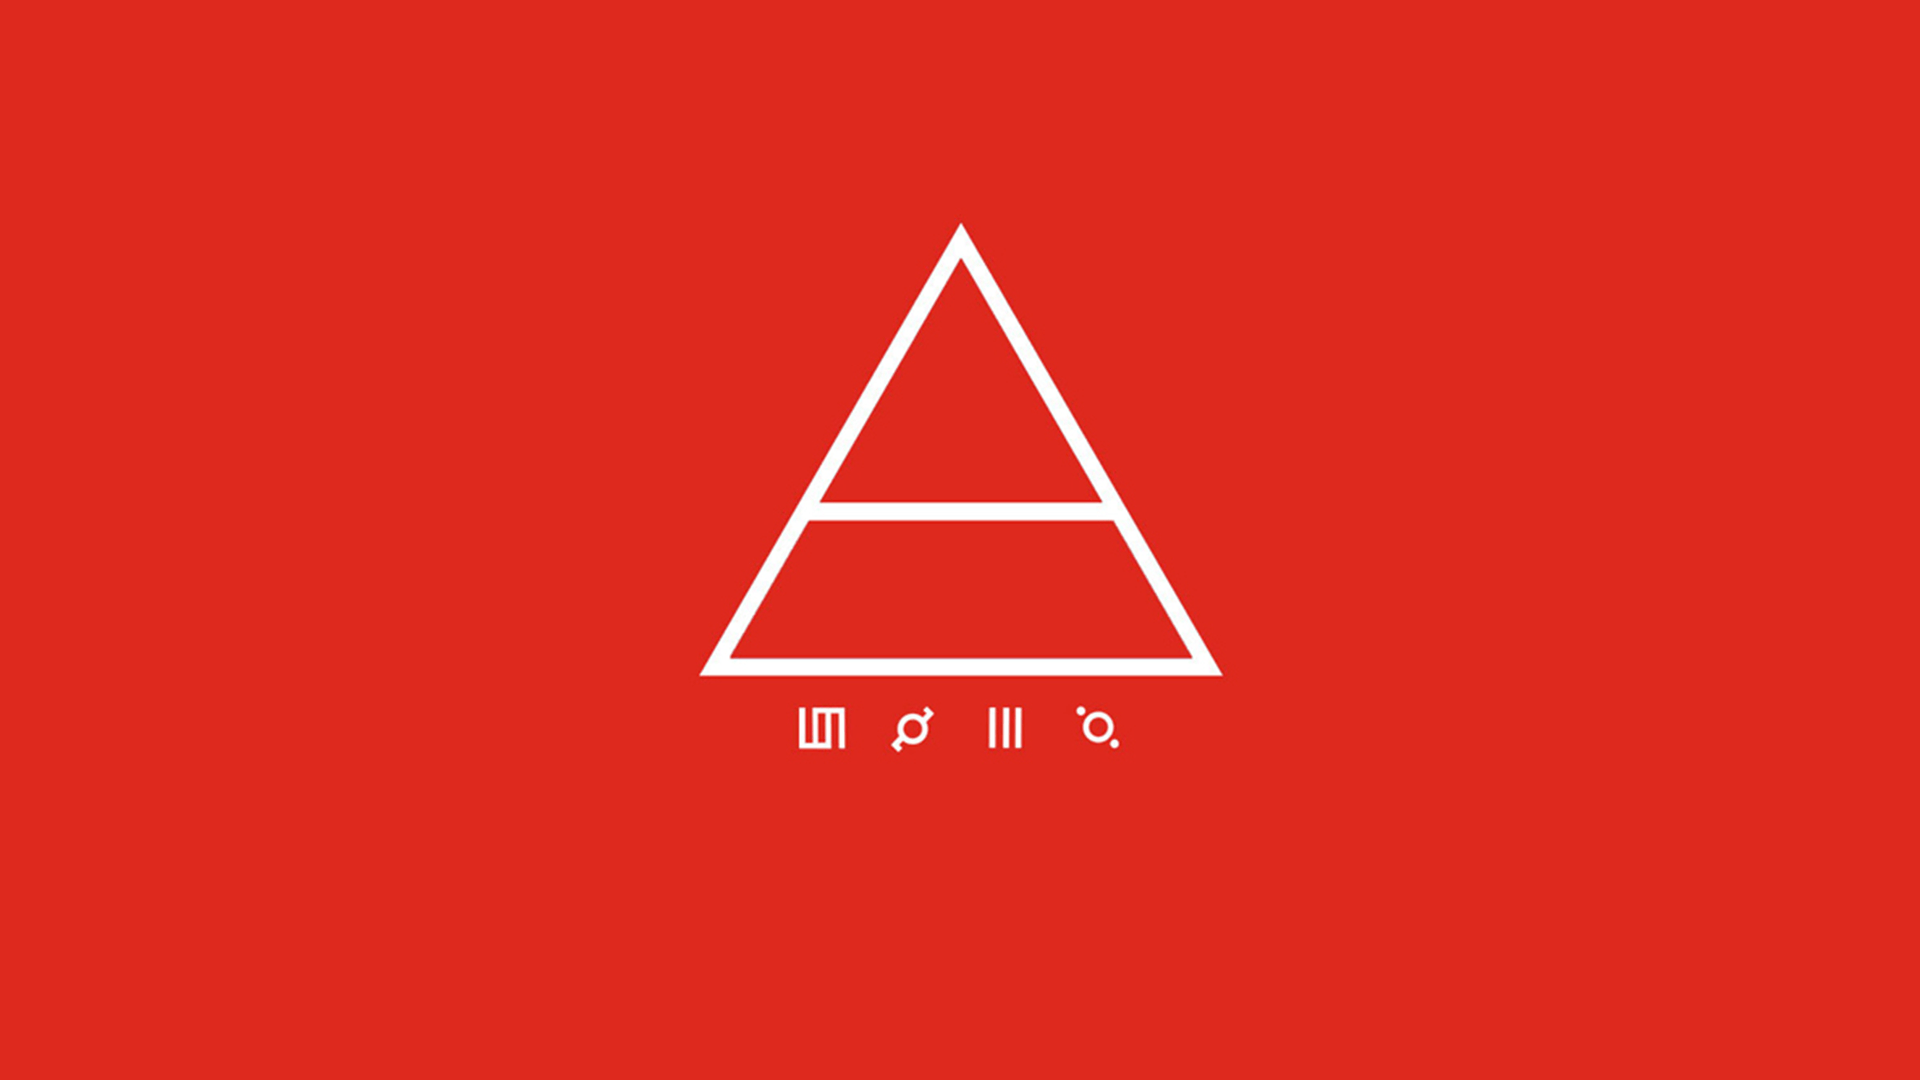 30 Seconds to Mars Logo - Red And White 30 Seconds To Mars Logo Wallpaper | PaperPull